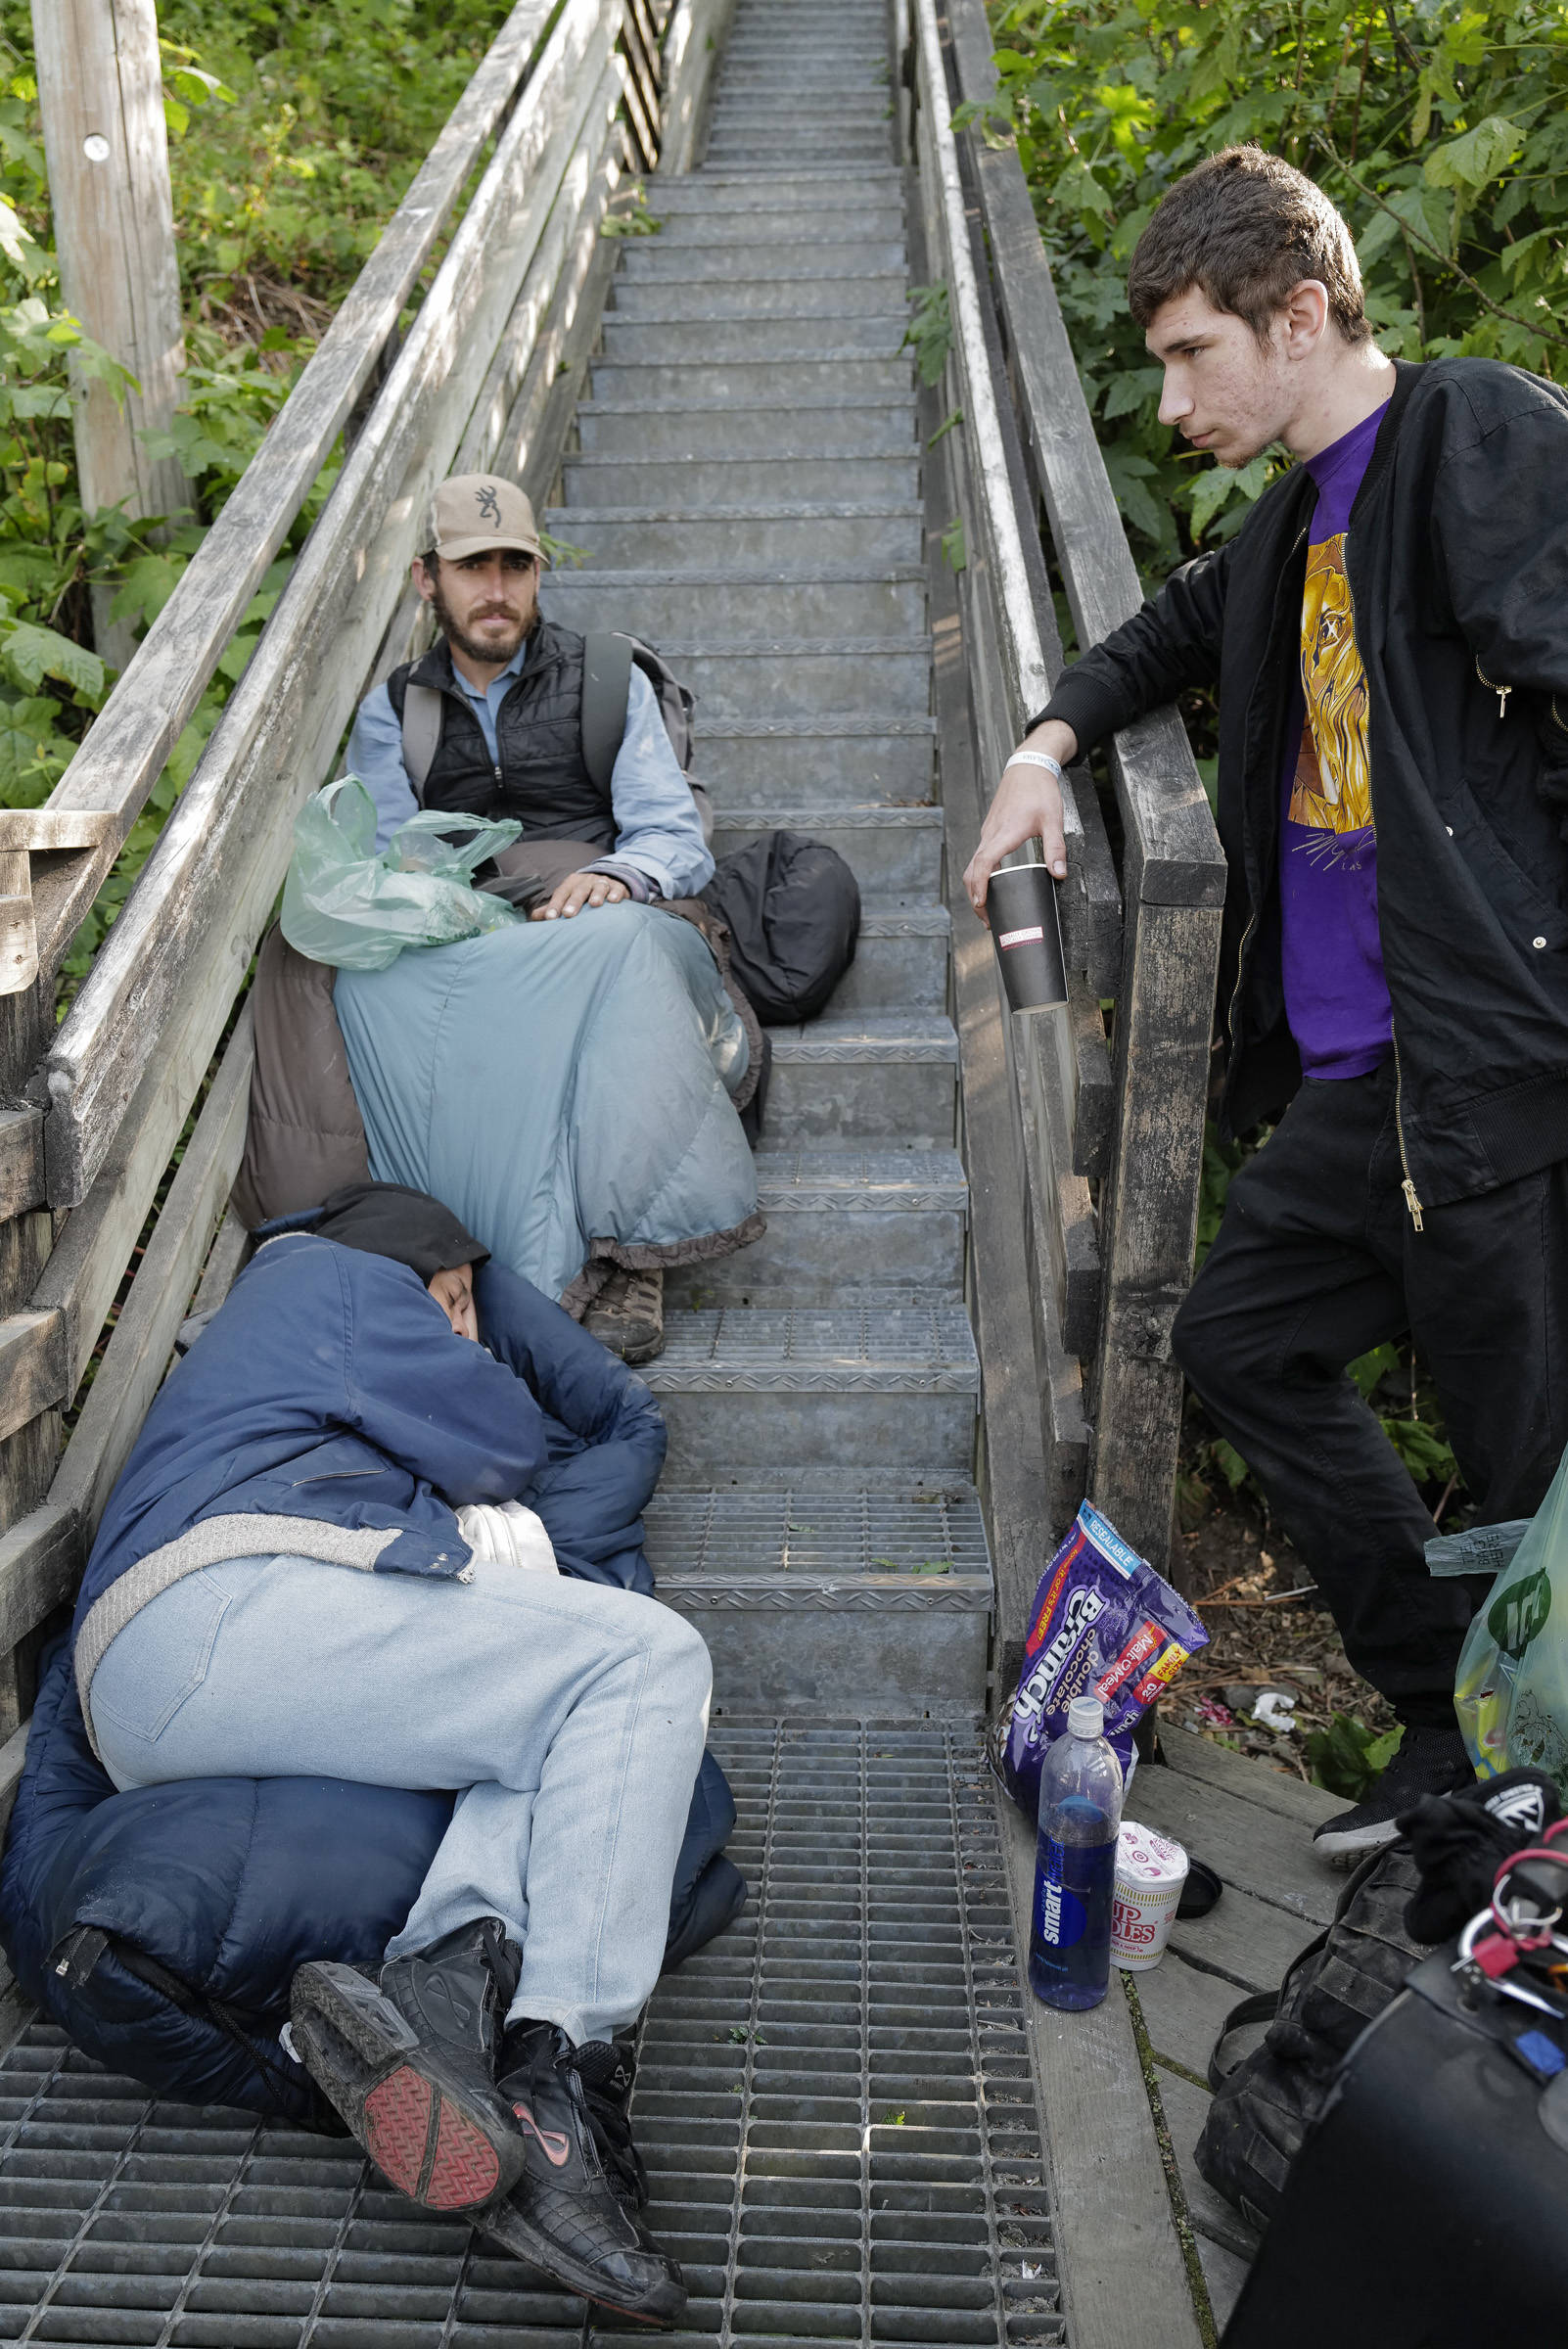 Homeless people spend their time on the Decker Way stairs after the Glory Hall’s closure on Tuesday, Aug. 13, 2019. (Michael Penn | Juneau Empire)